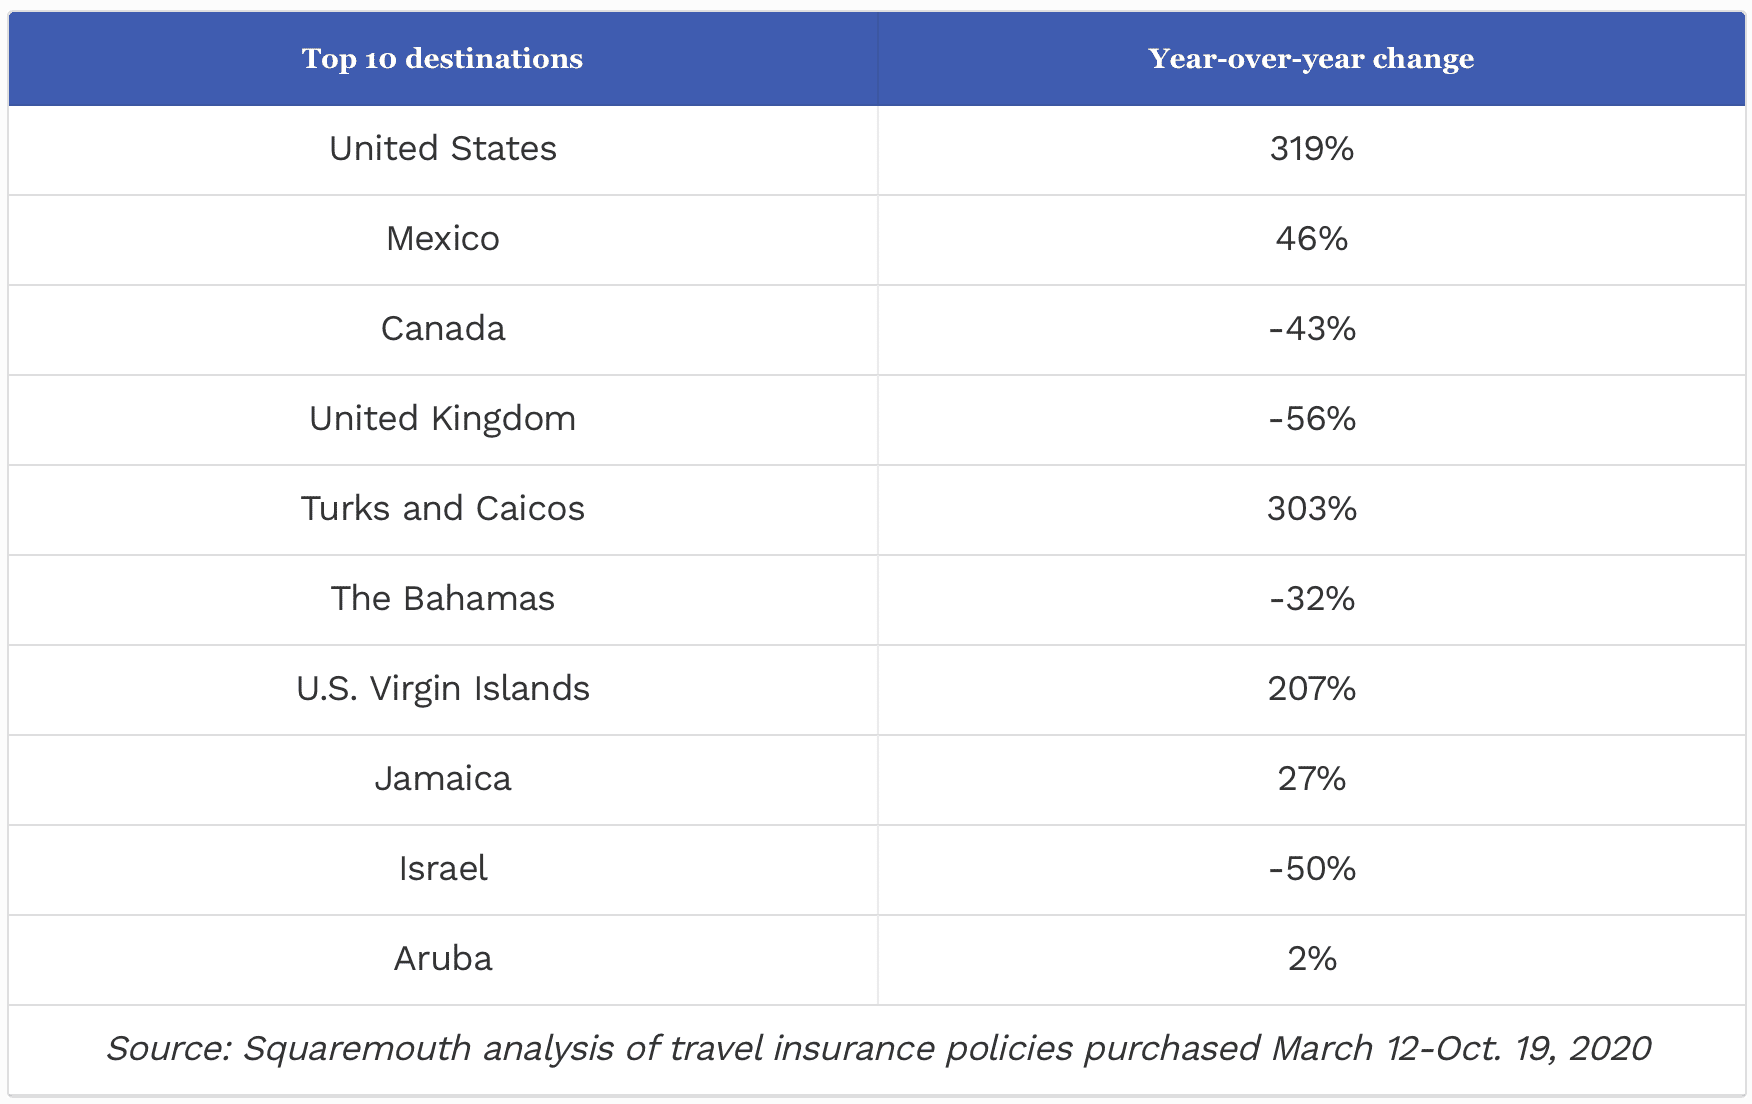 Caribbean Countries are the Most Popular U.S. Tourism Destinations